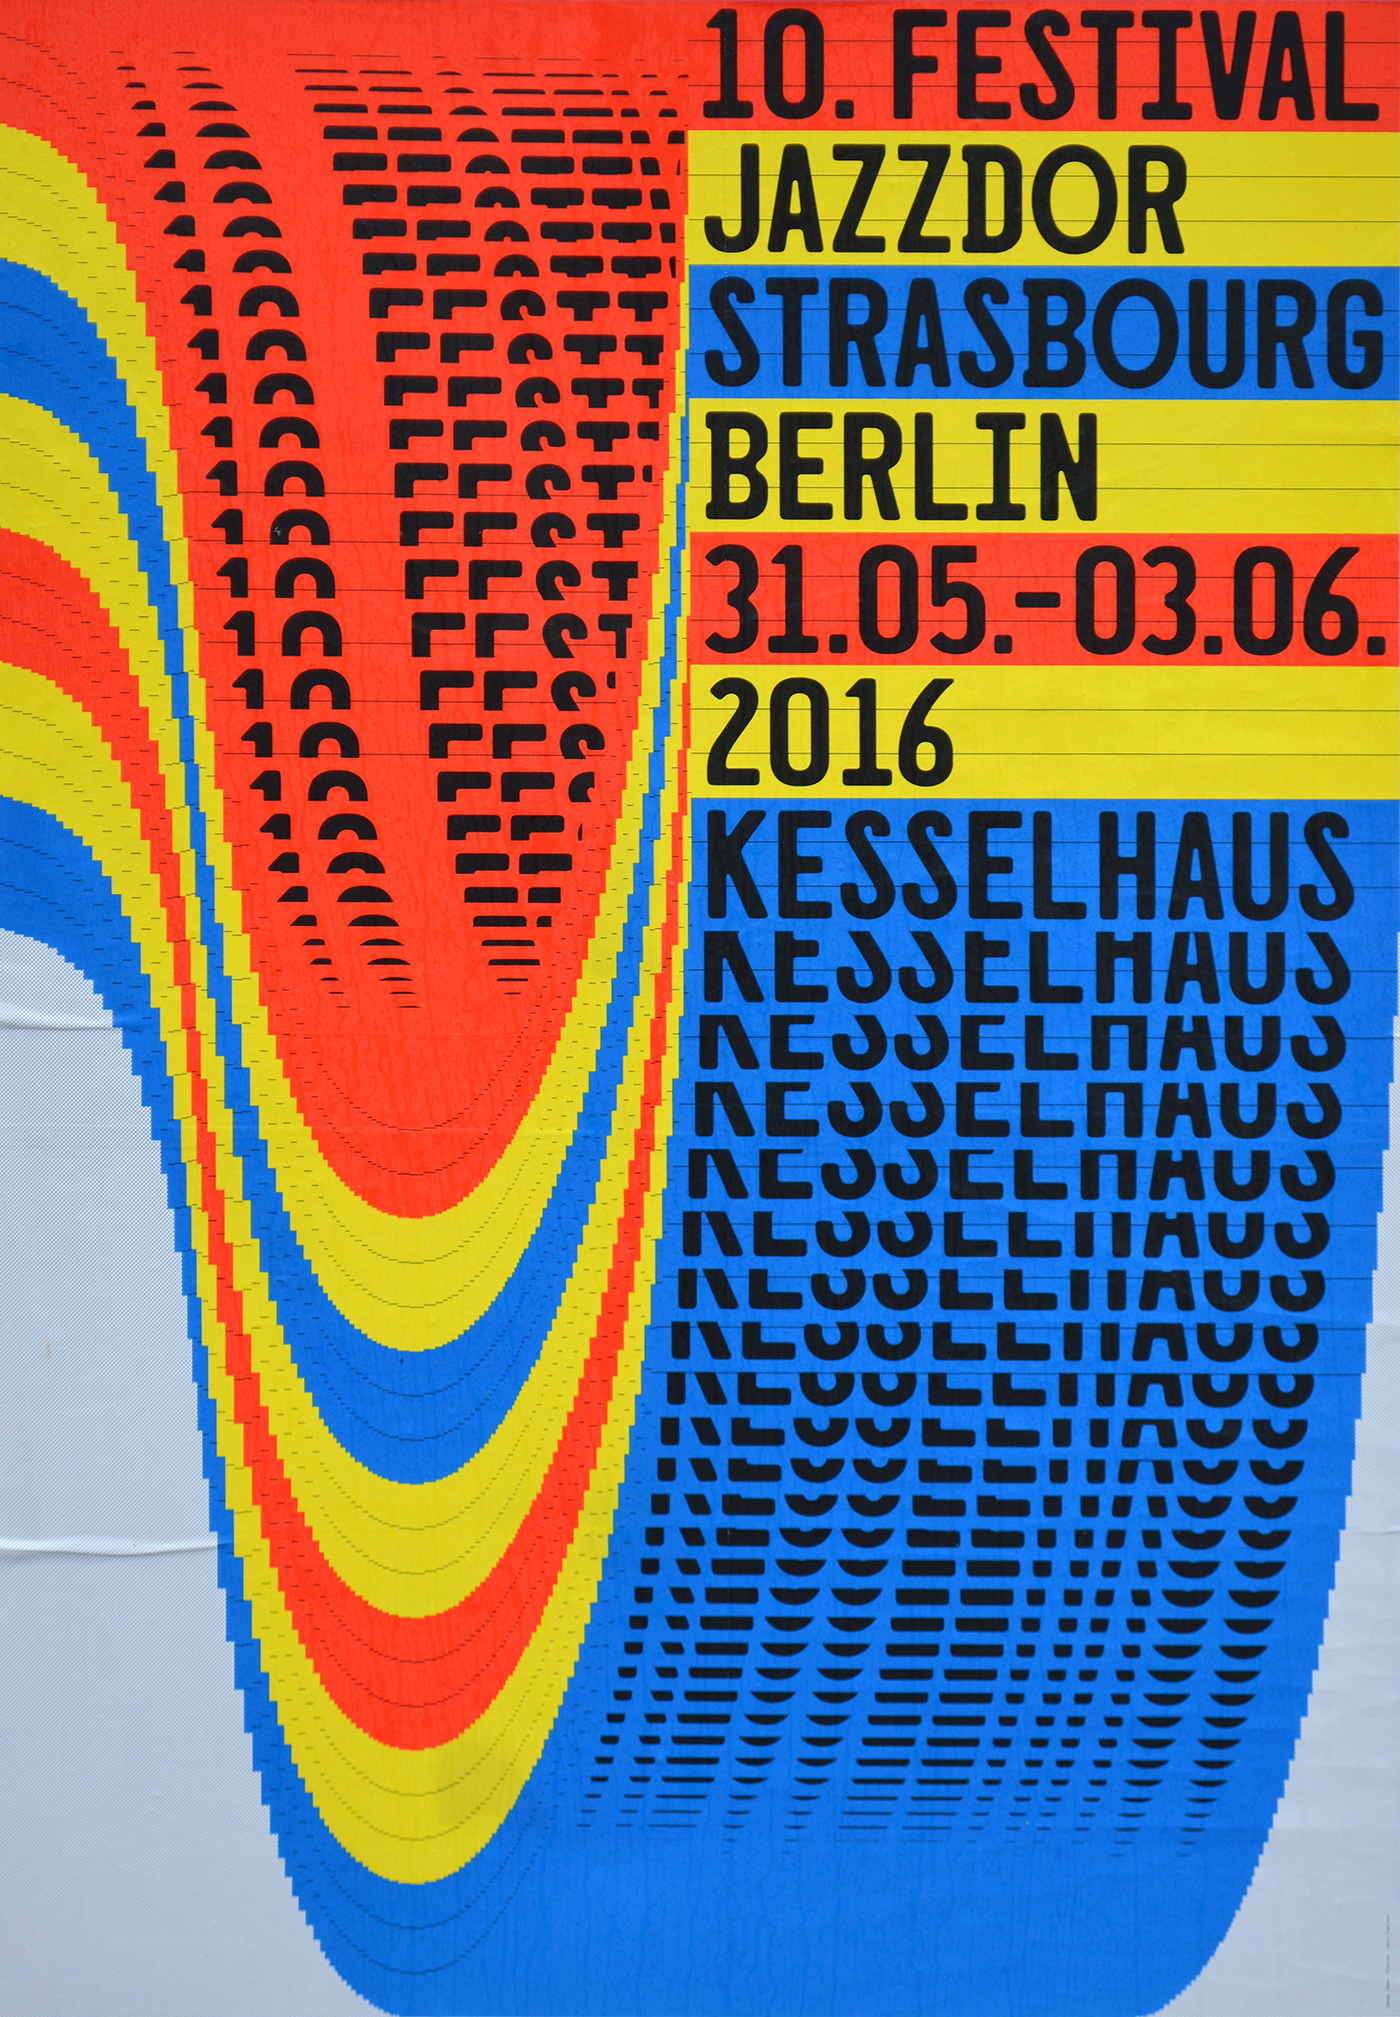 Jazzdor Strasbourg Berlin 2016 posters - Fonts In Use